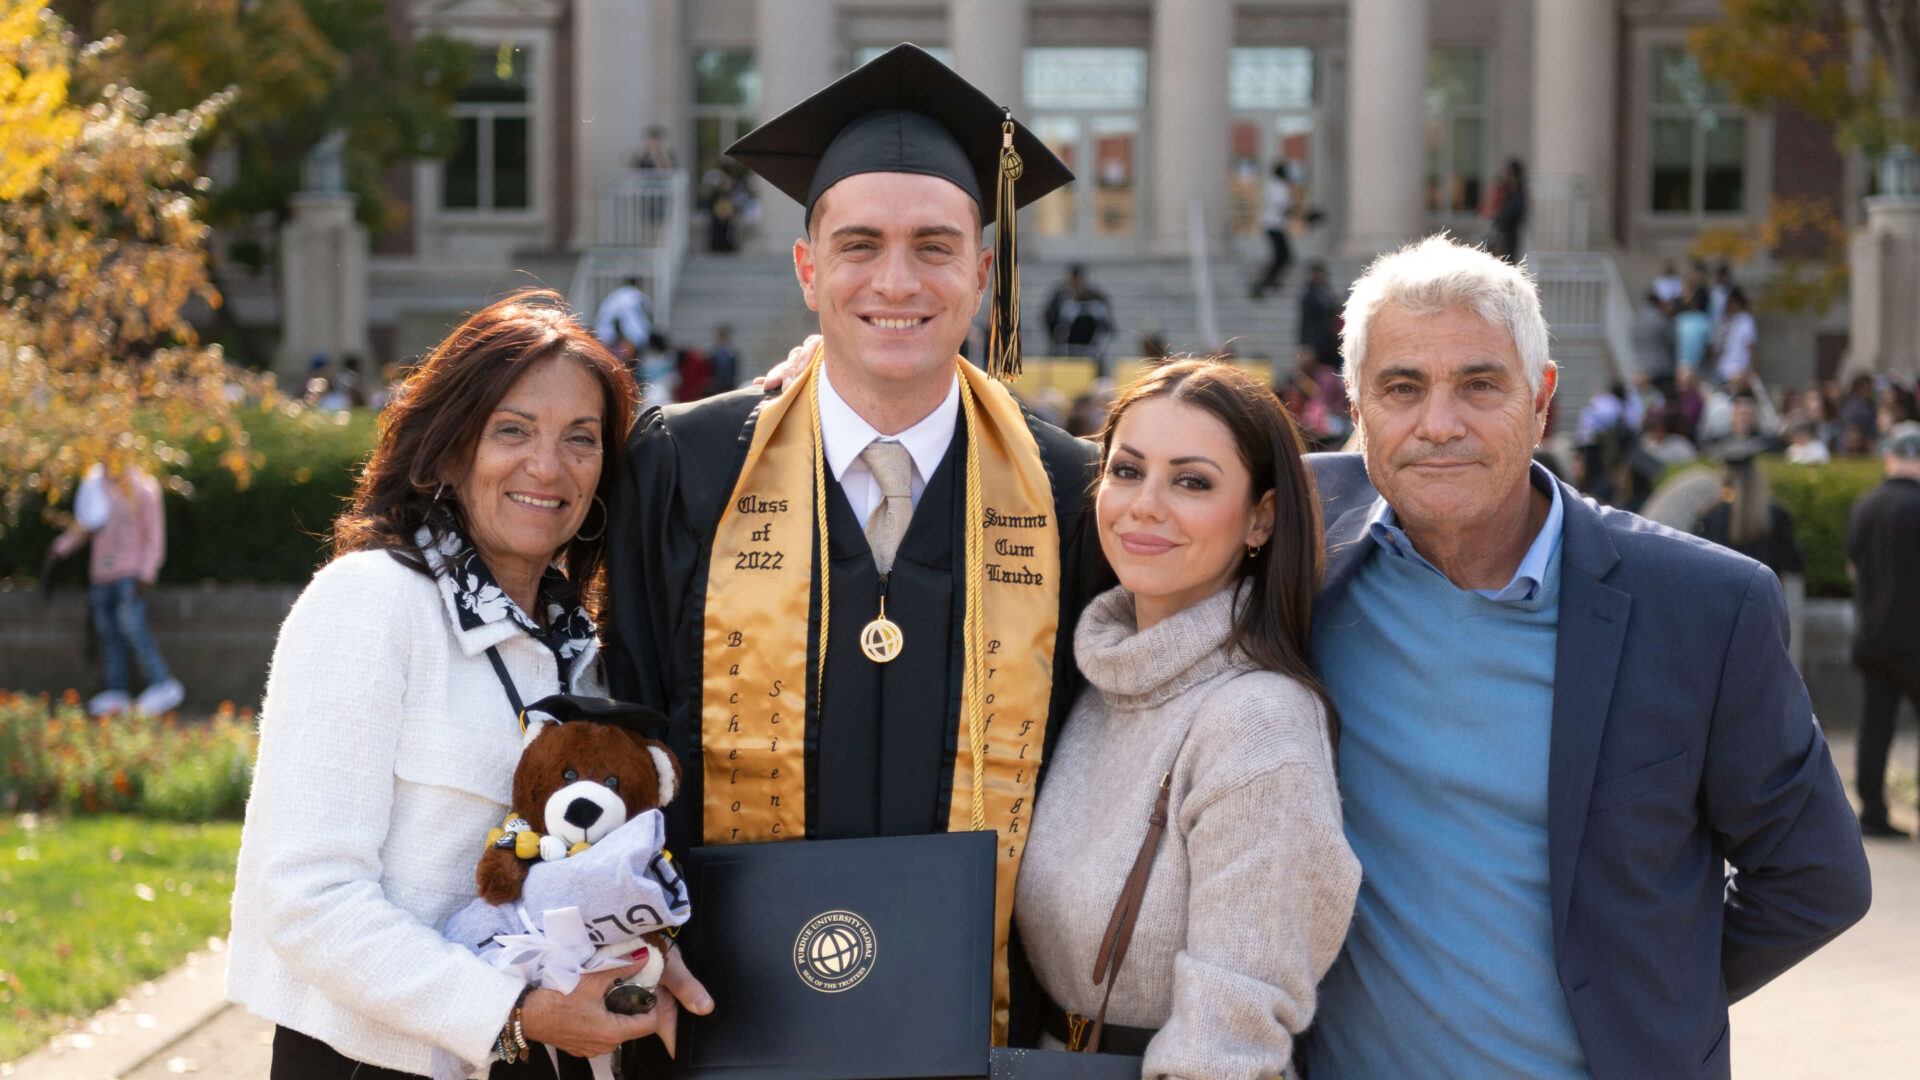 Gabe Giusti poses with his family after commencement.